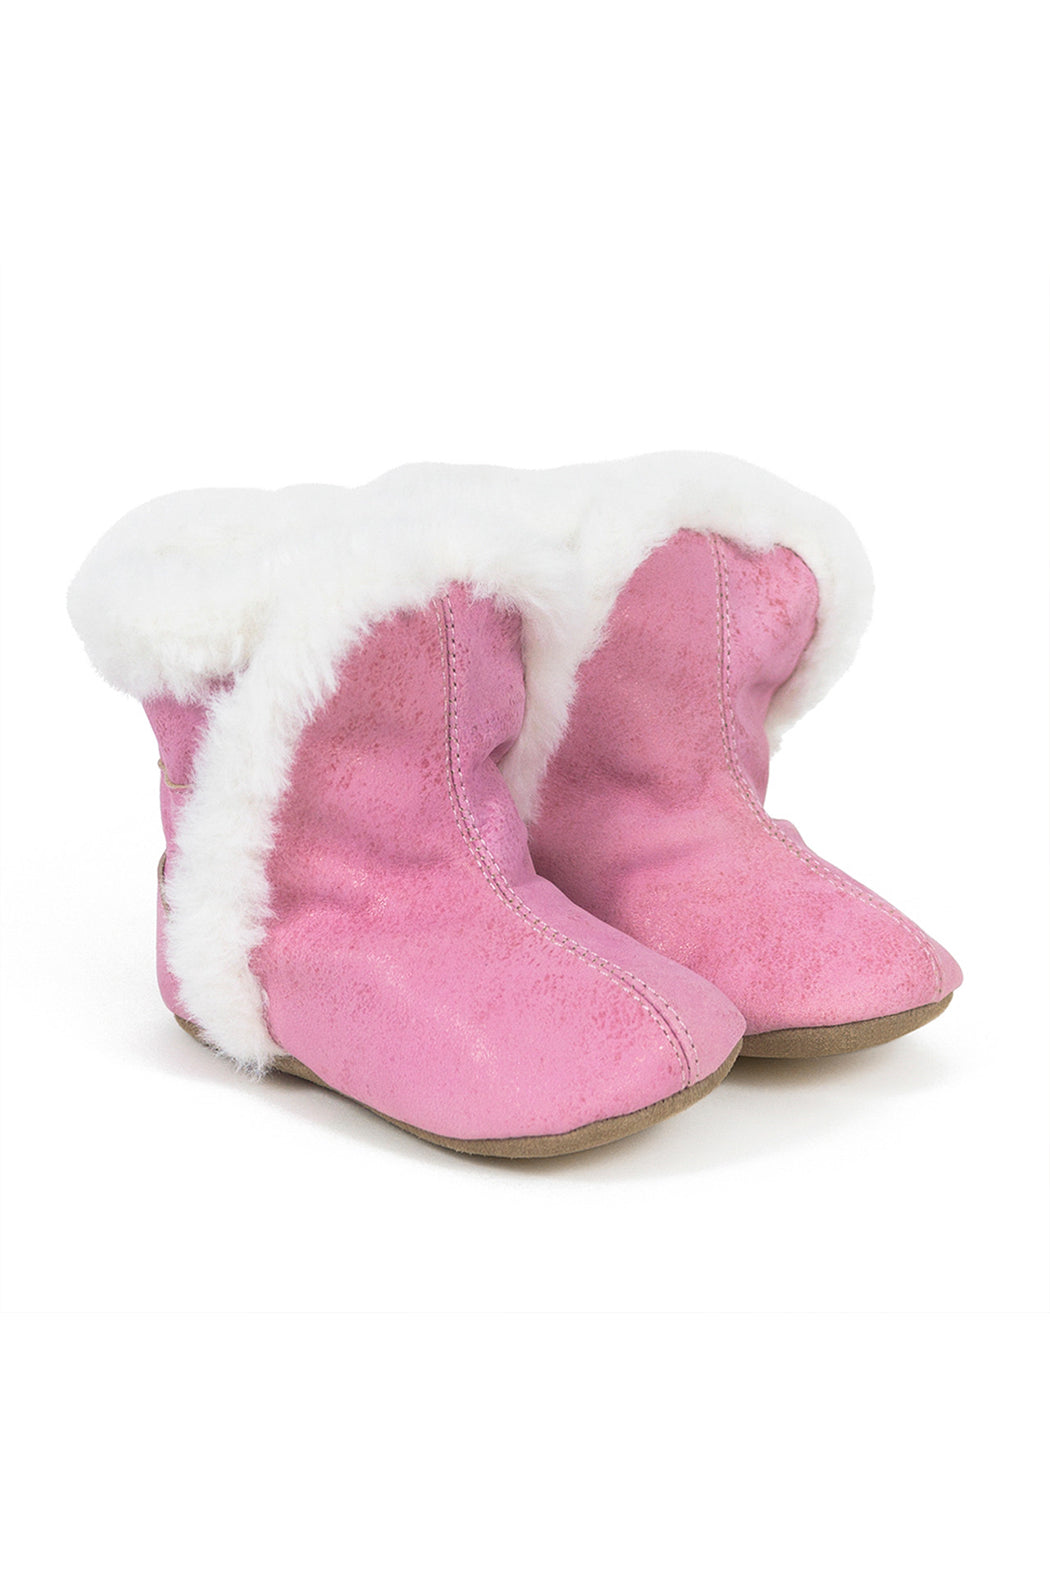 Robeez Classic Boot - Light Pink